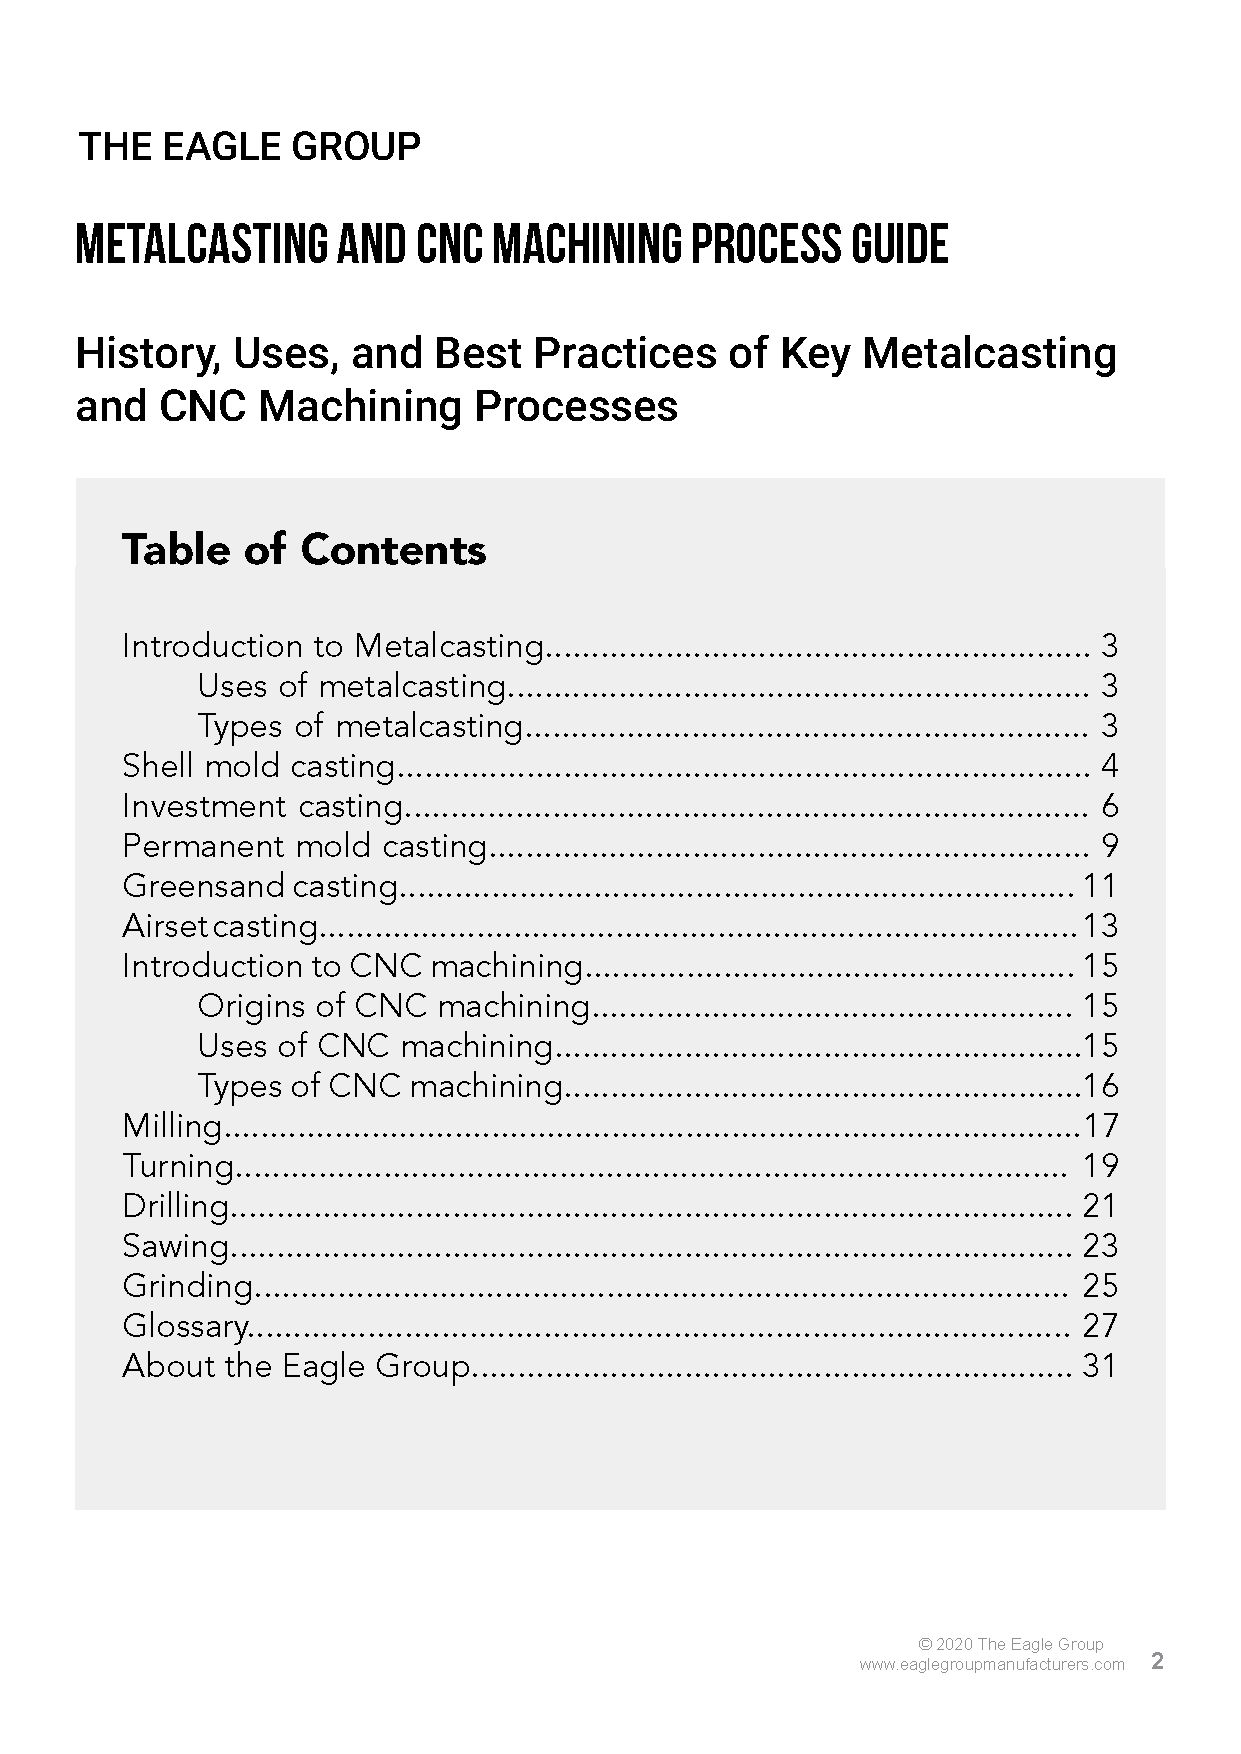 History, Uses, and Best Practices of Key Metalcasting and CNC Machining Processes(图2)